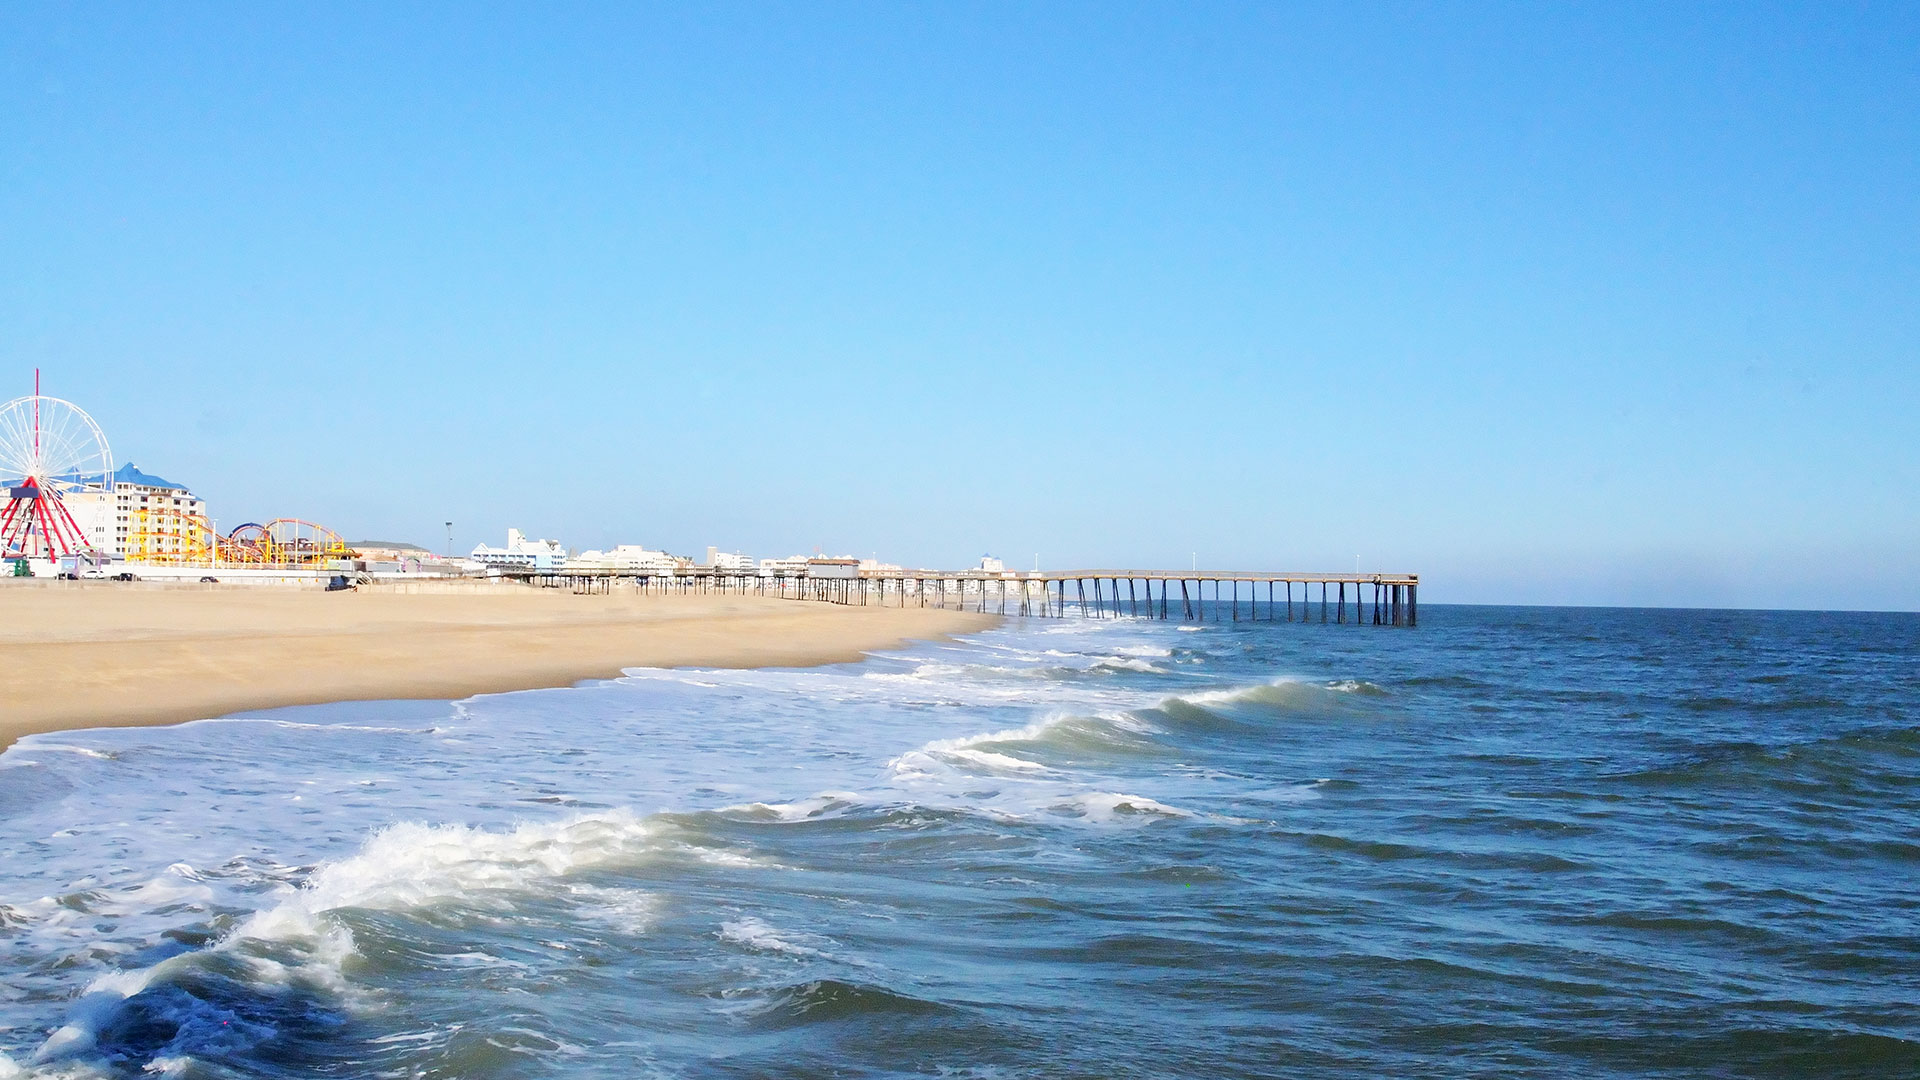 Ocean City Maryland beach and boardwalk during the day